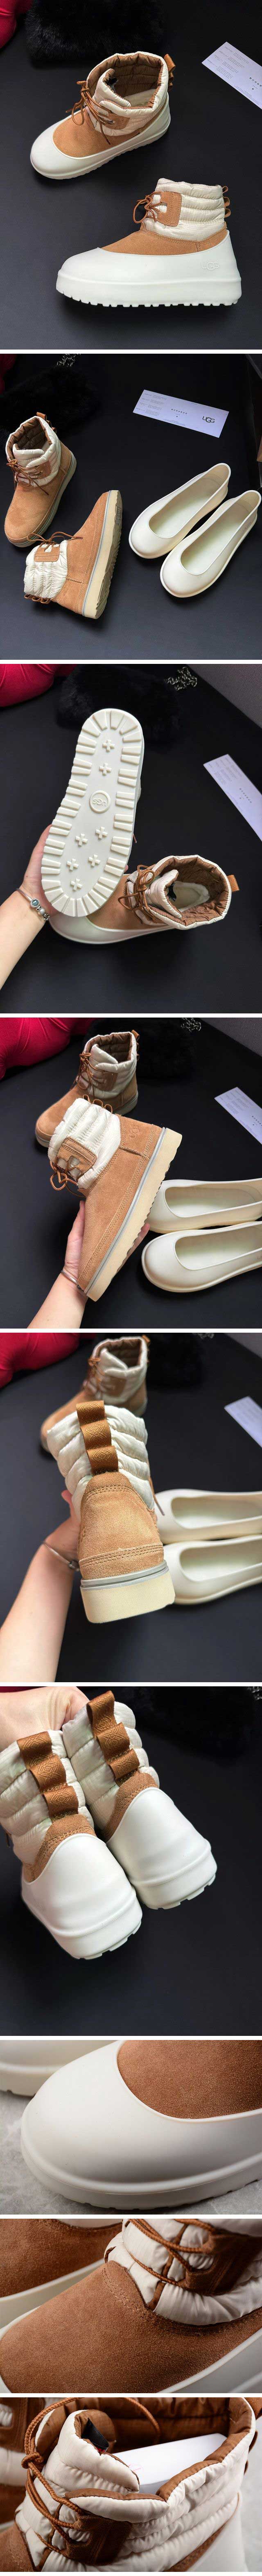 UGG Classic Mini Lace-Up Weather Chestnut / Whitecap アグ クラシック ミニ レースアップ ウェザー チェスナット/ホワイトキャップ